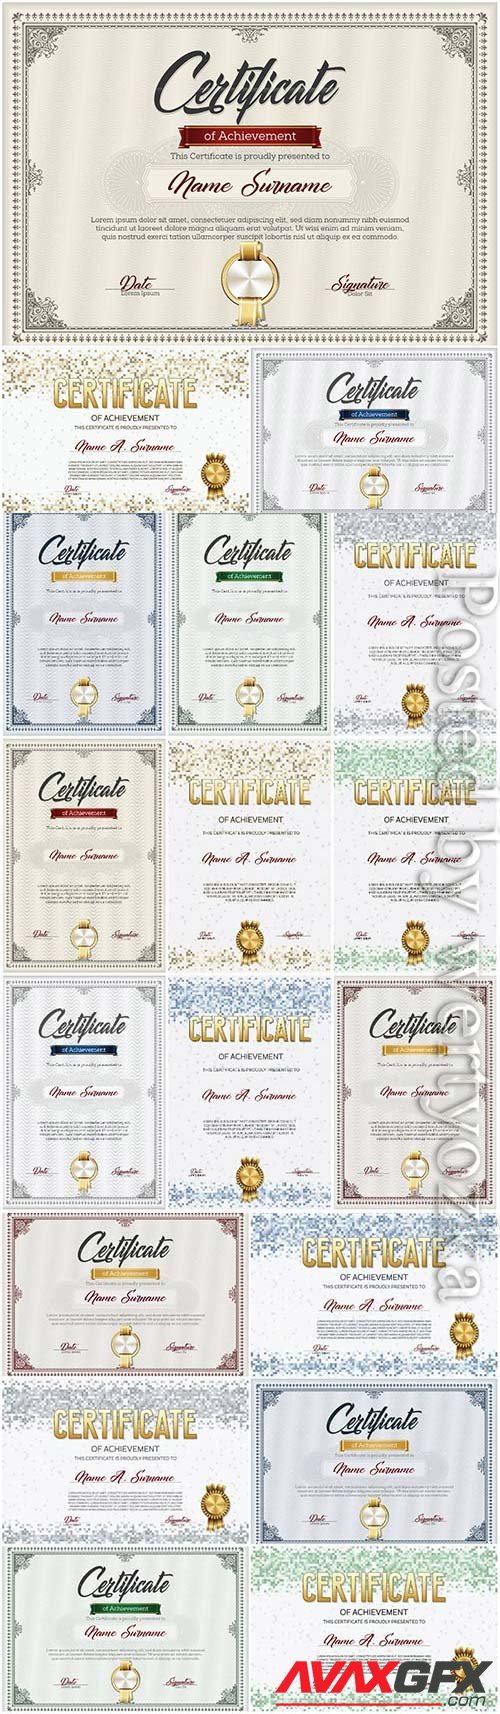 Vintage certificates and diplomas with ornaments in vector